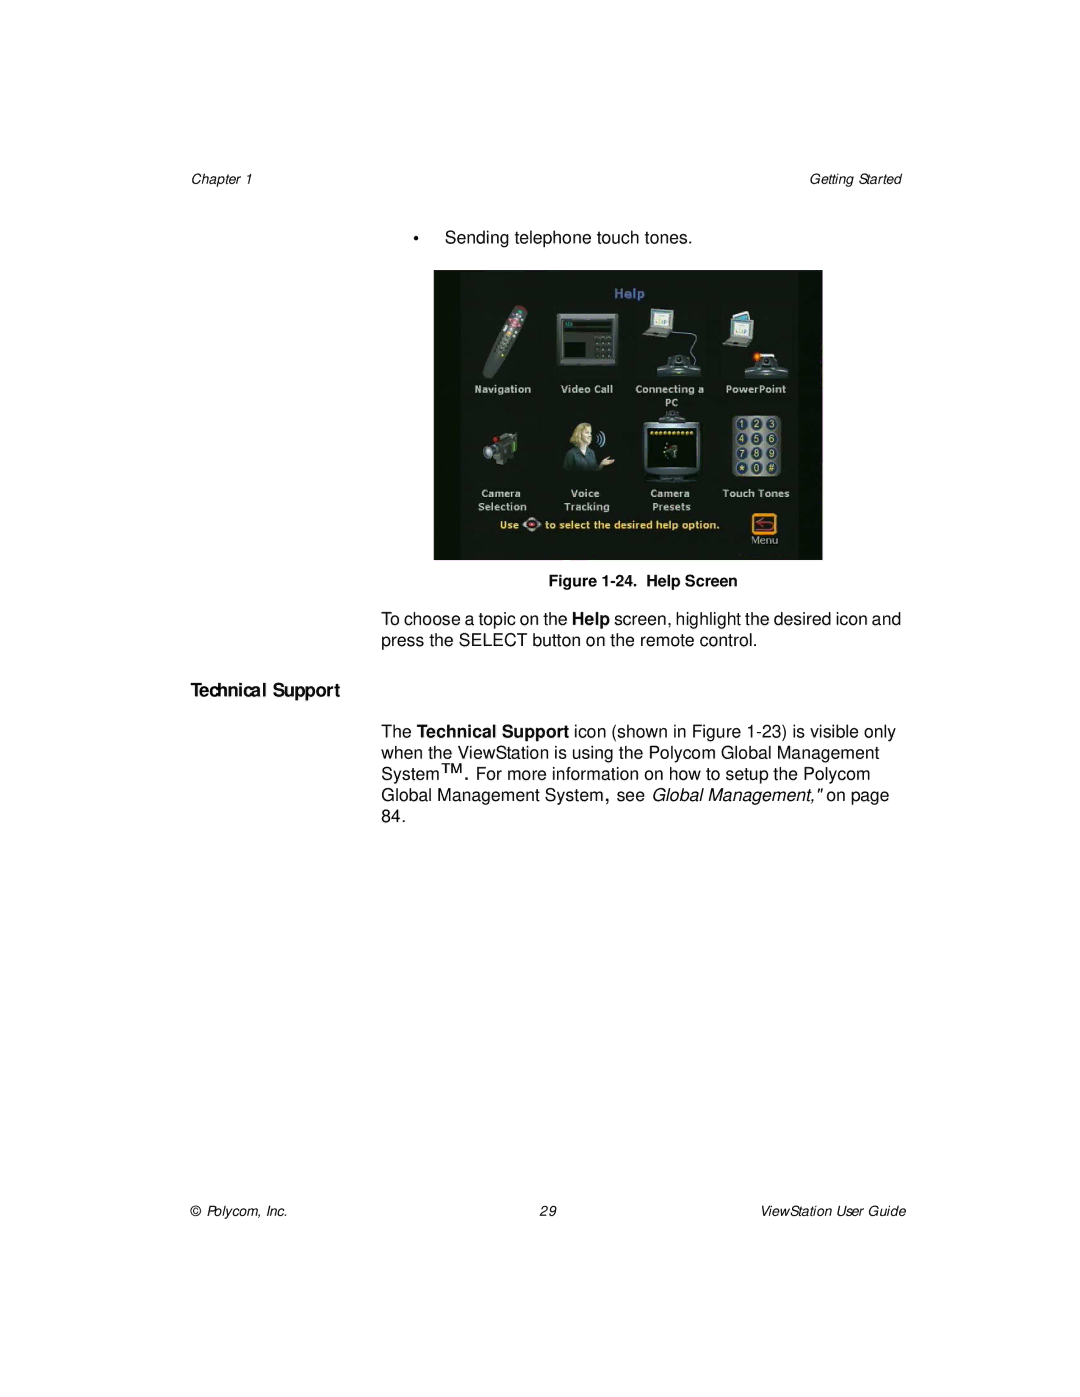 Polycom ViewStation manual Technical Support, Help Screen 